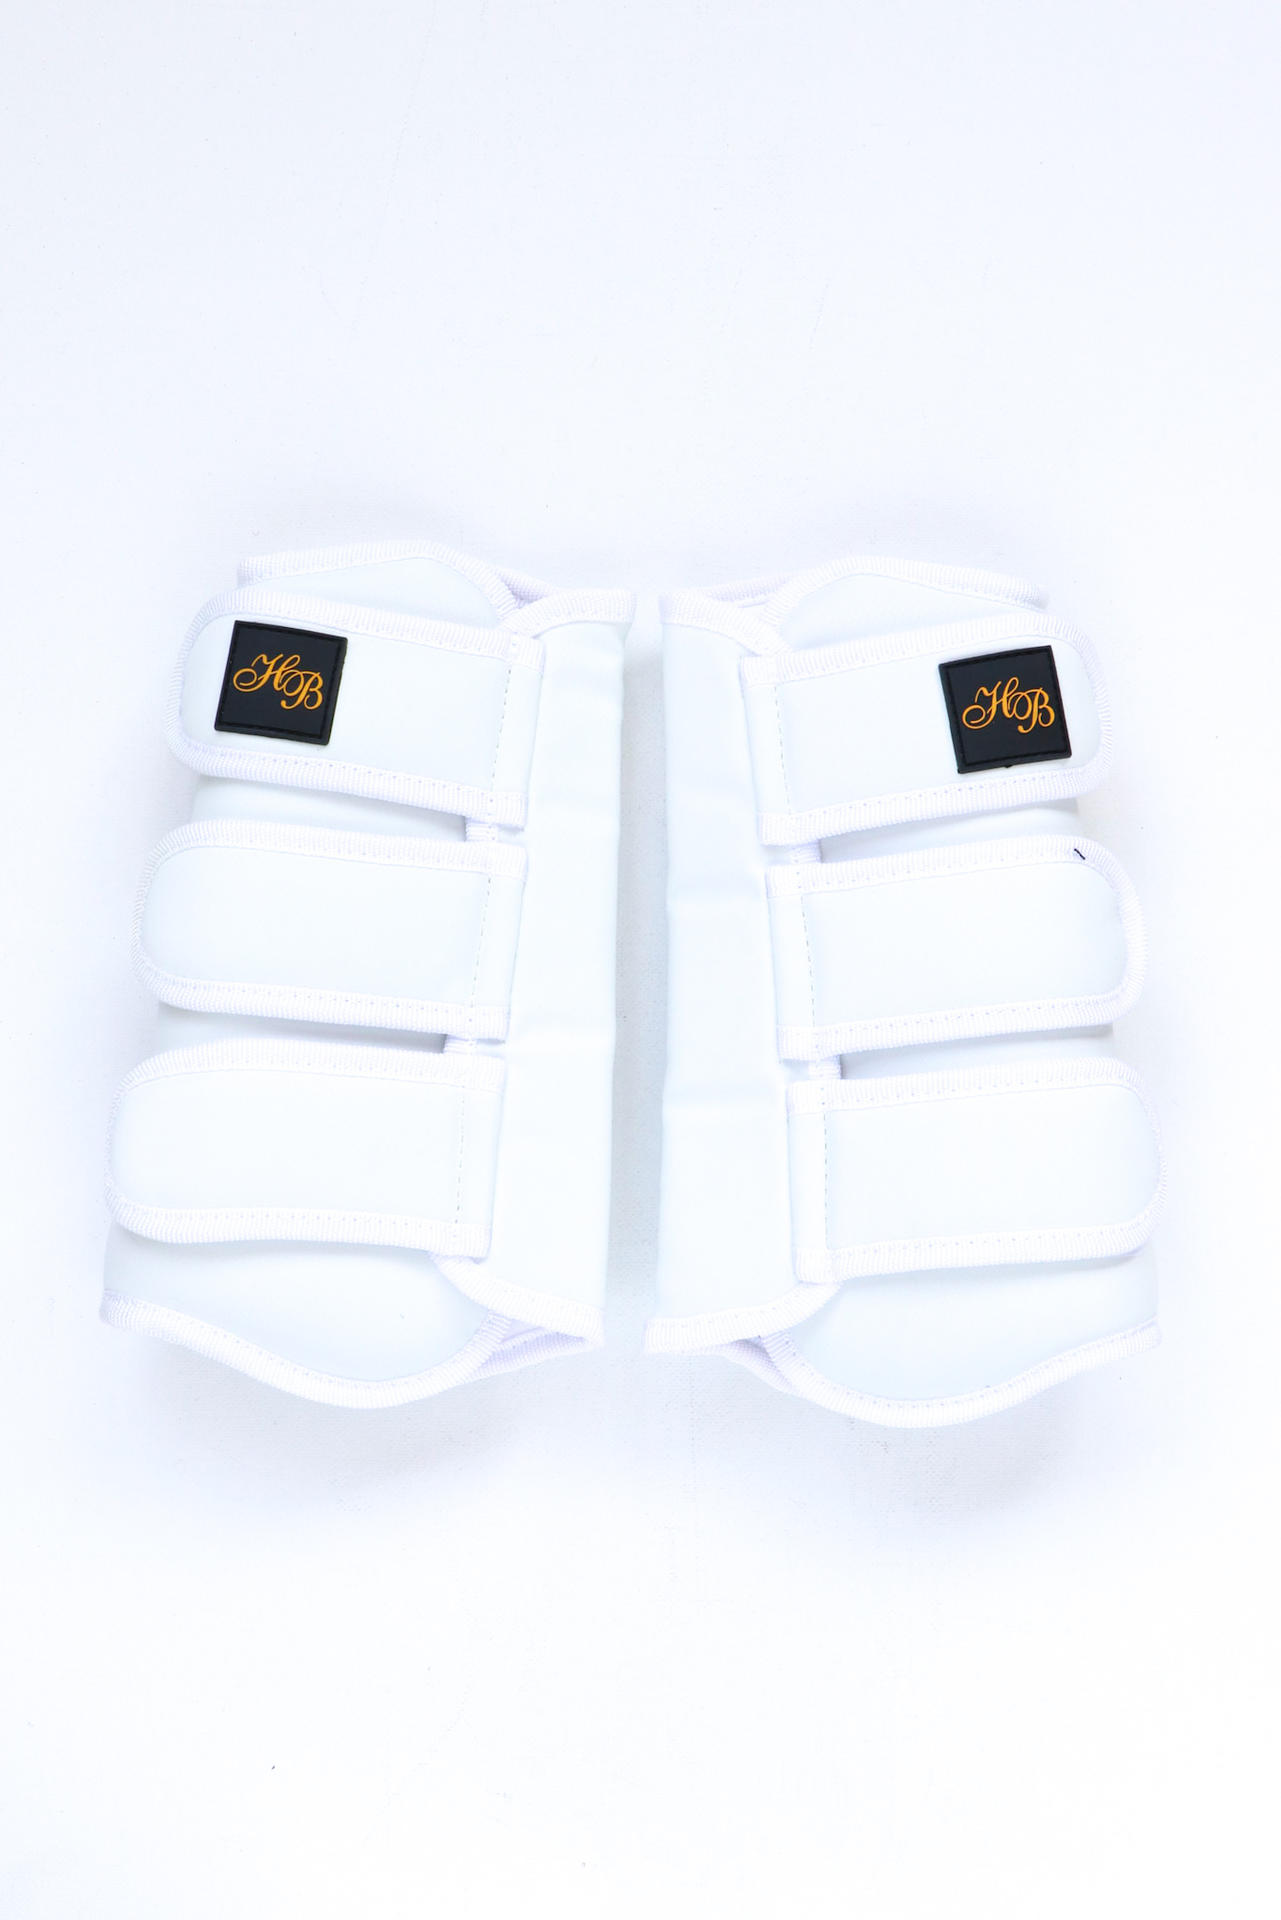 206 Comfort tendon protection boots forelegs white medium horse foot protection